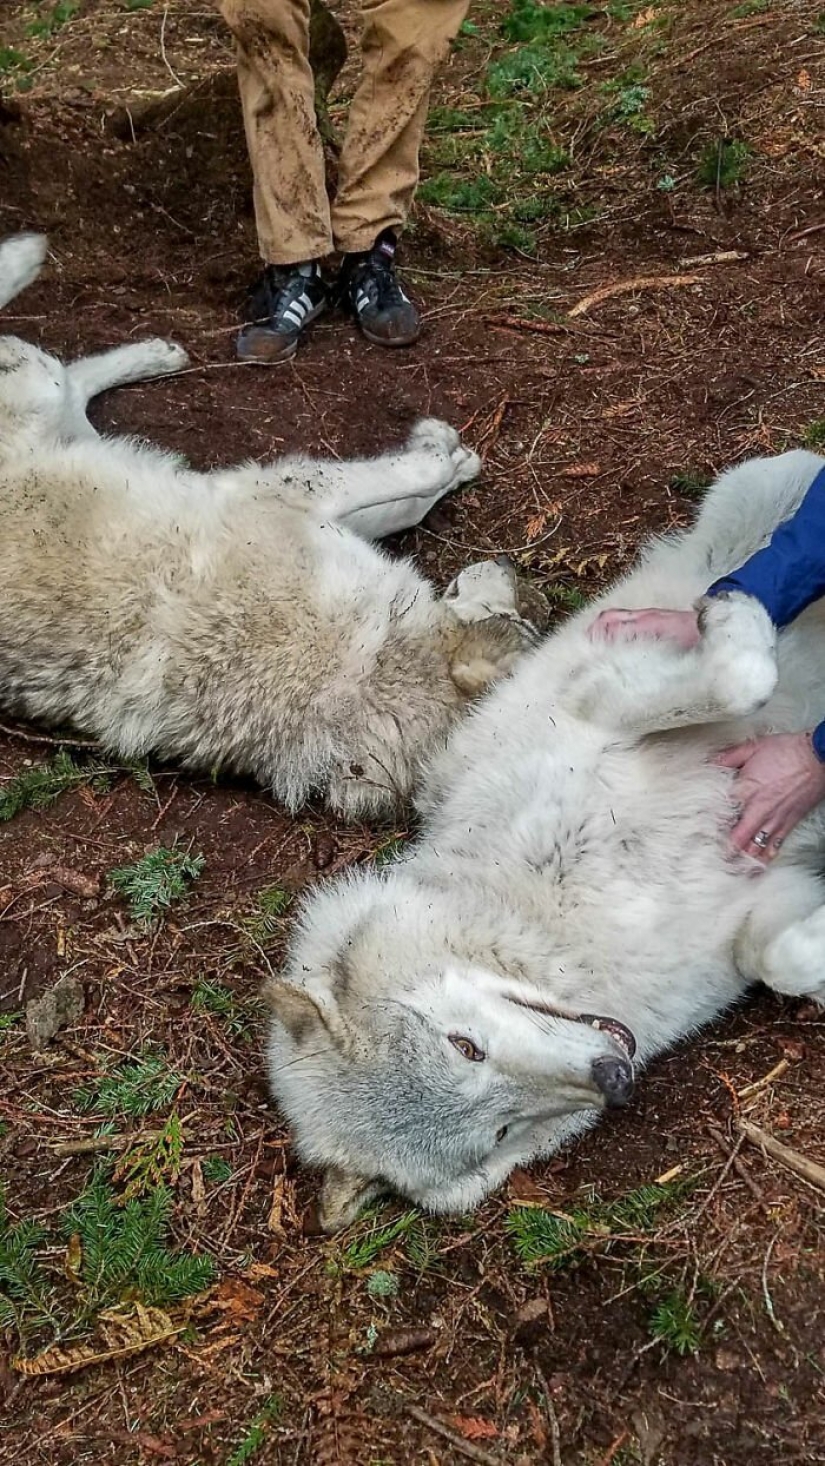 Americans pay $ 200 to pet wild wolves